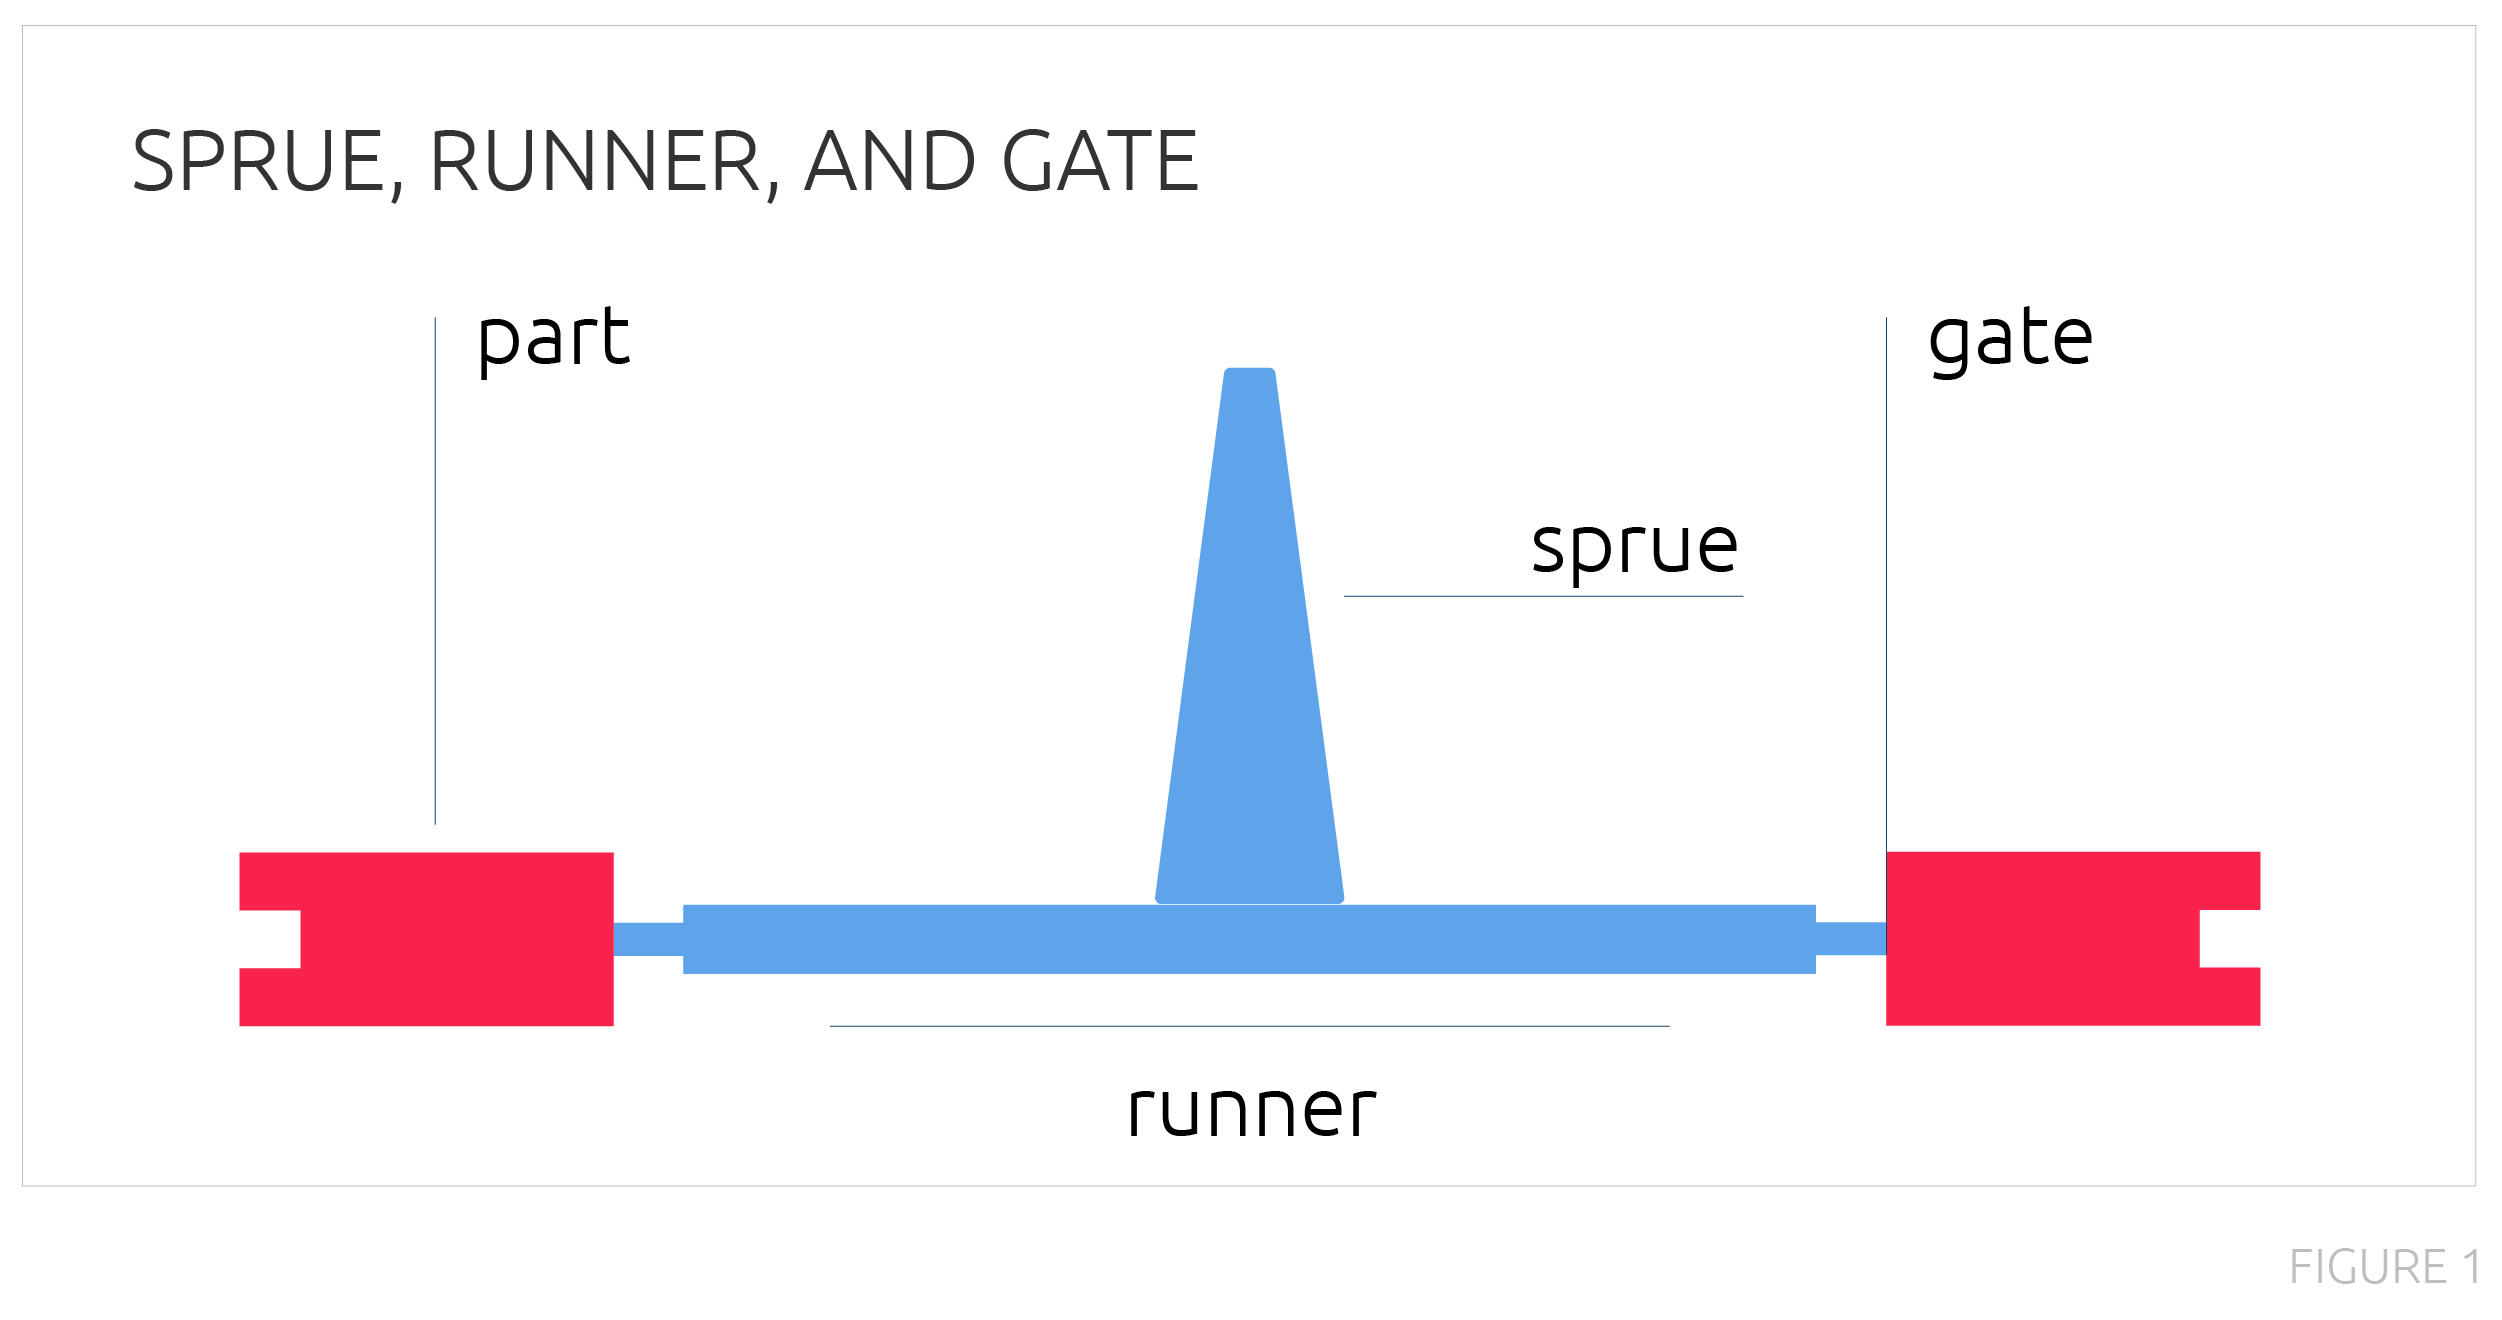 Illustrative example showing the runner, sprue, and gate in an injection molding process